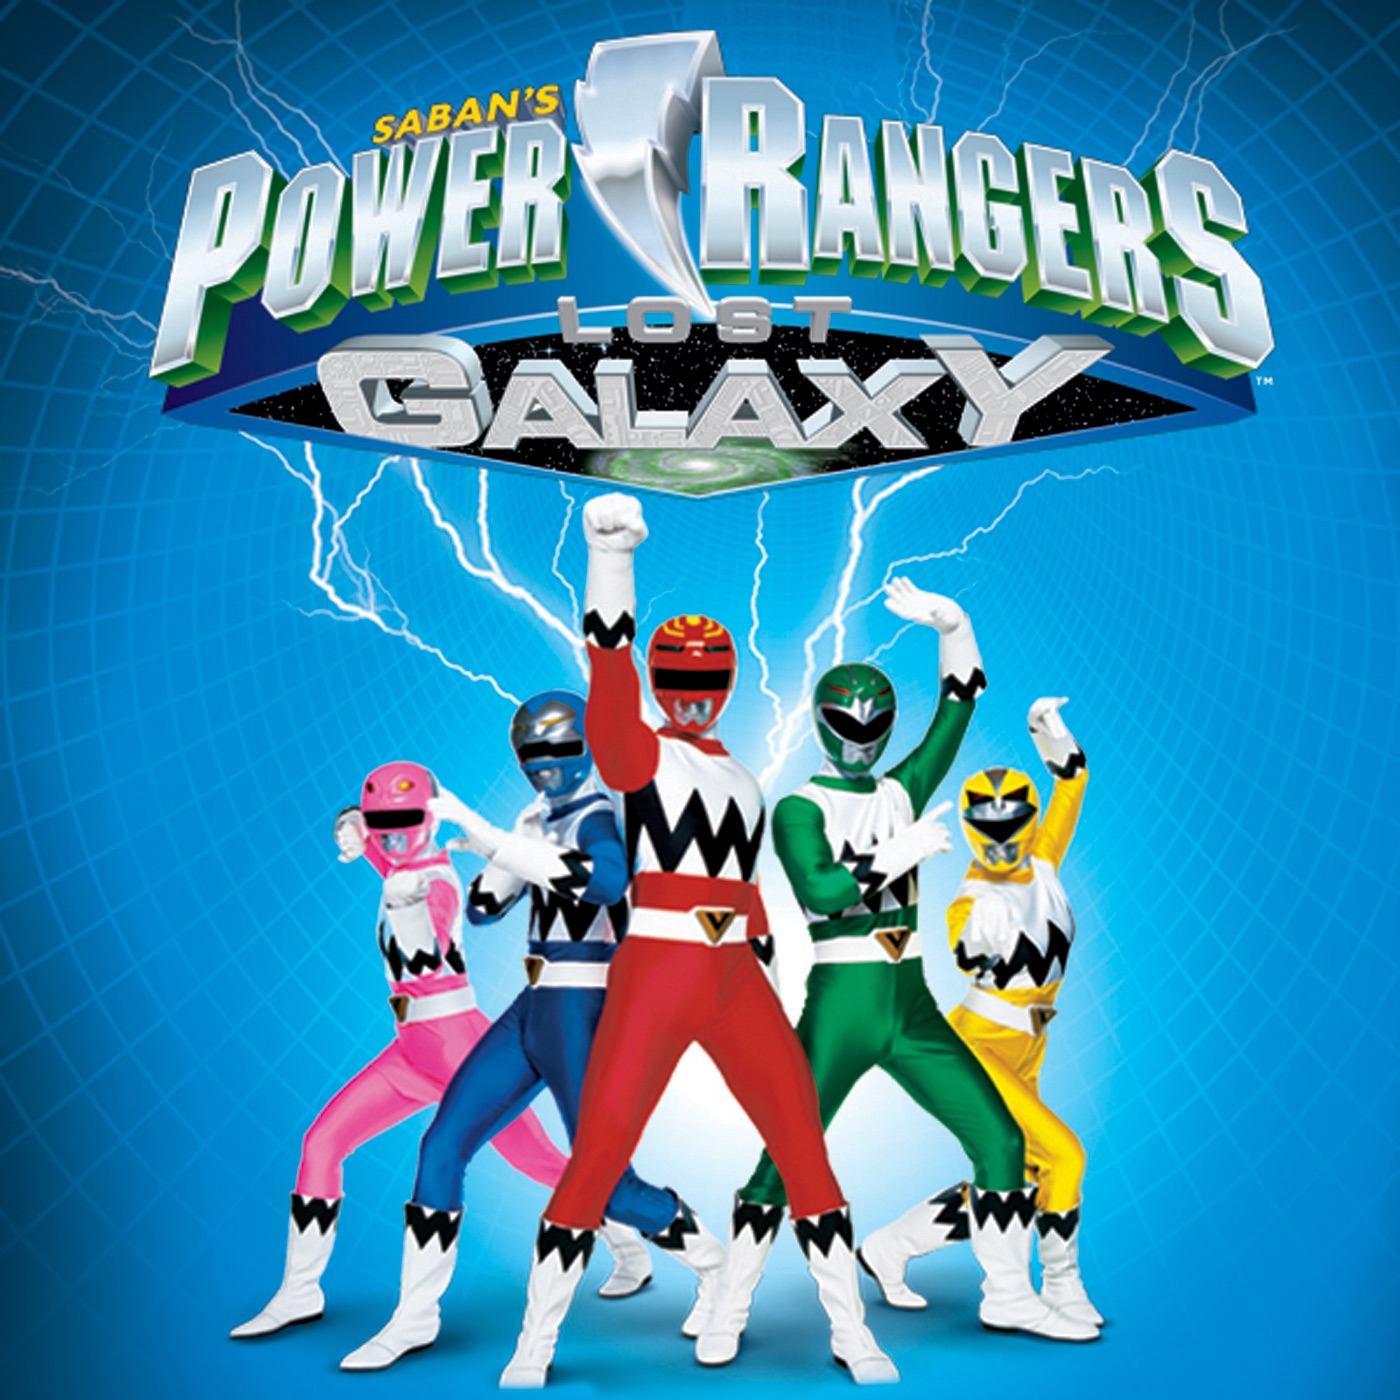 Power Rangers Lost Galaxy On Itunes